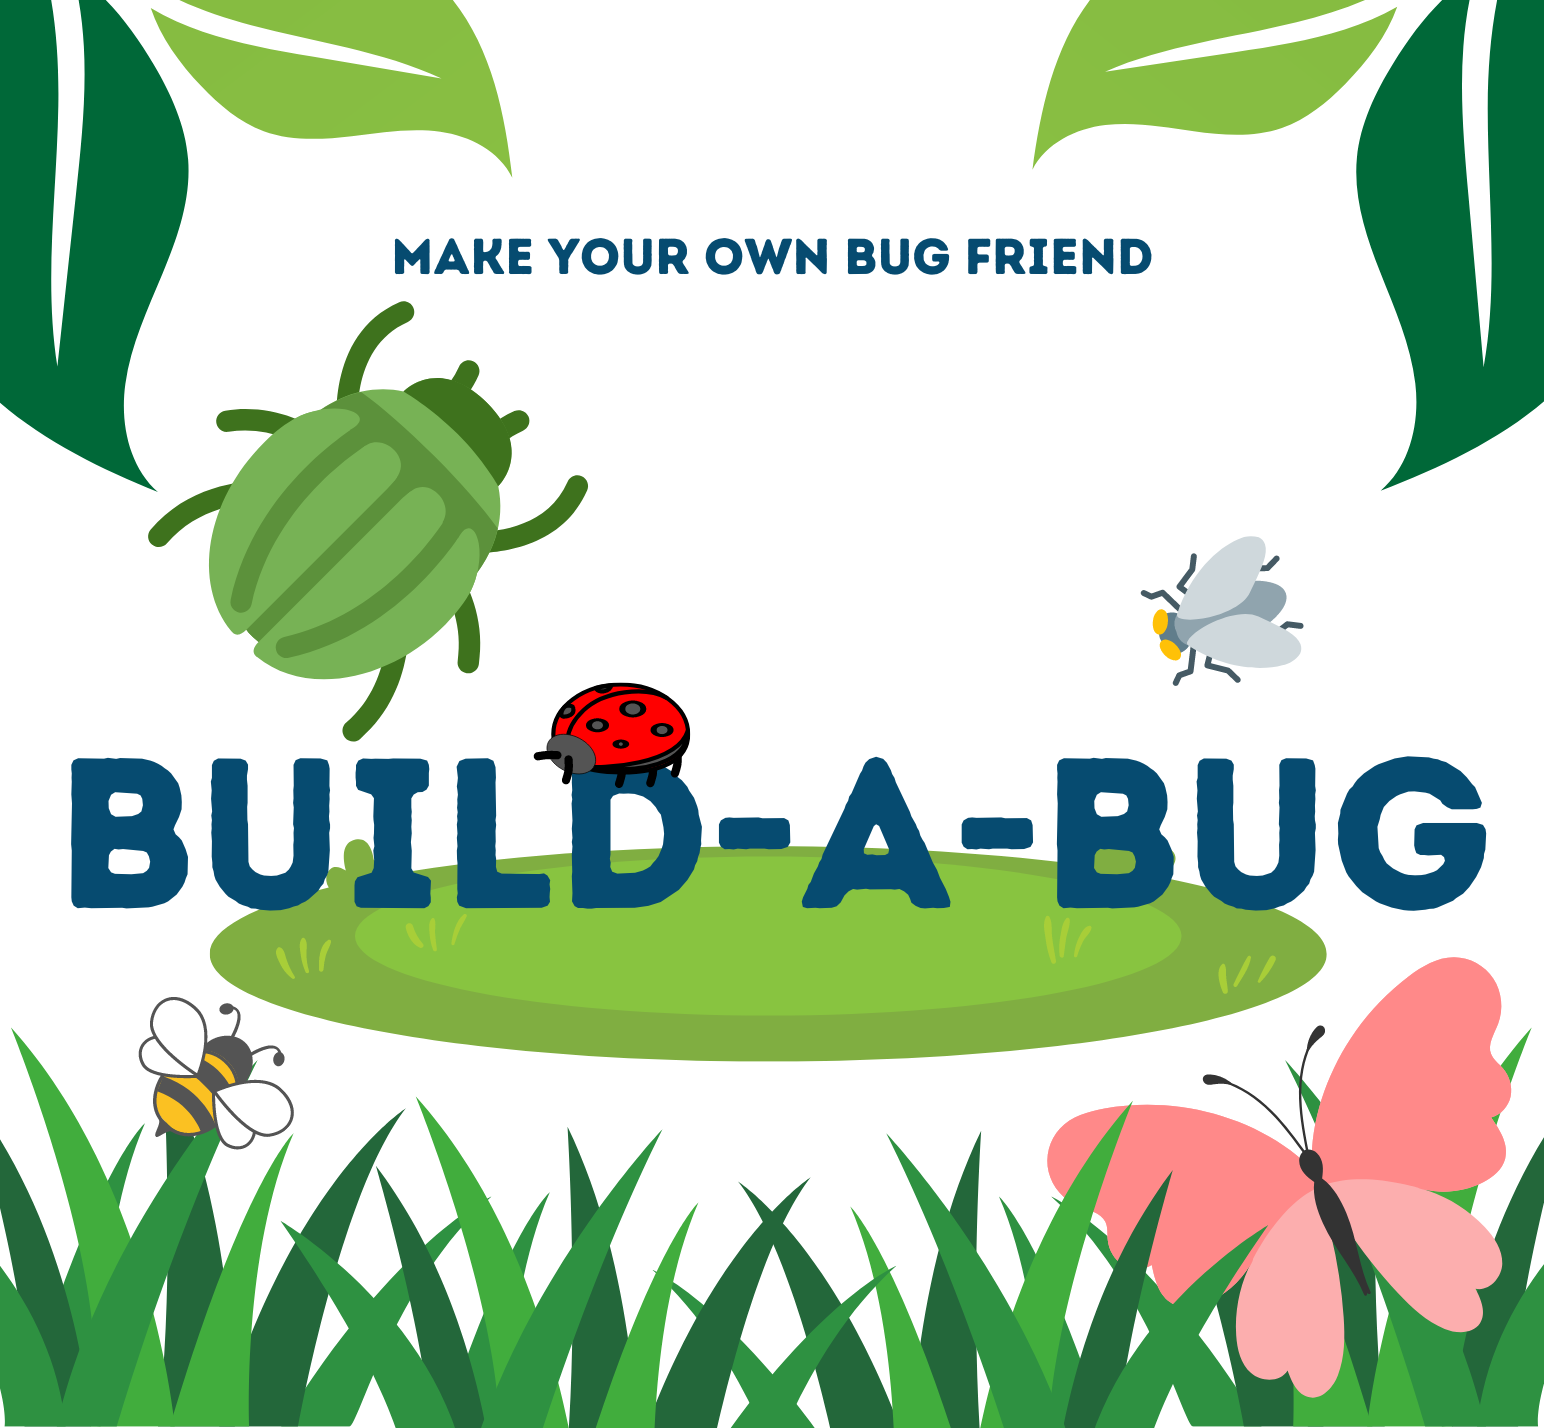 Large words saying "Build A Bug" surrounded by bugs, with leaves at the top and grass at the bottom.